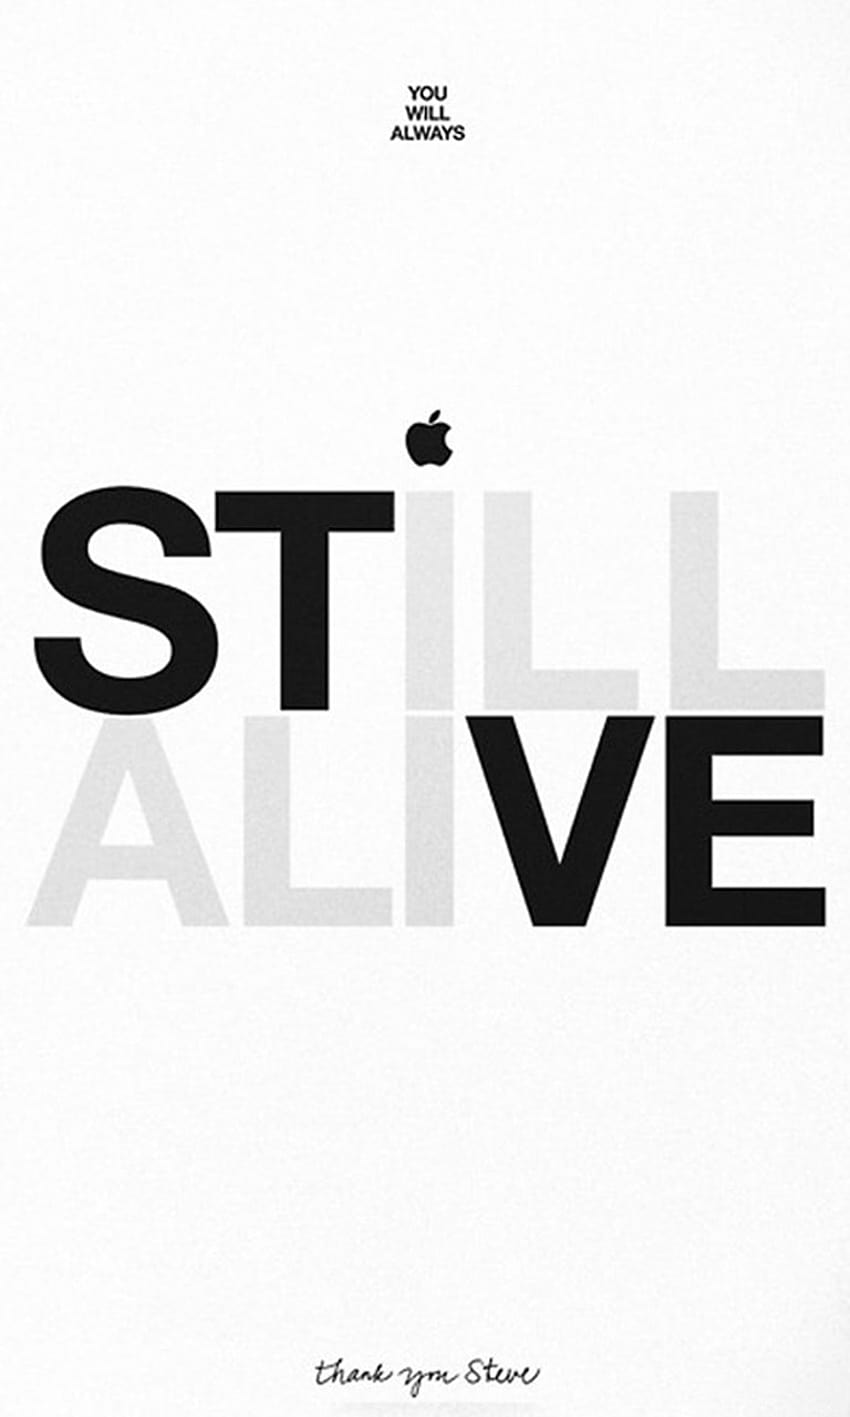 steve-jobs-quotes-creative-apple-design-12 | Powered Labs